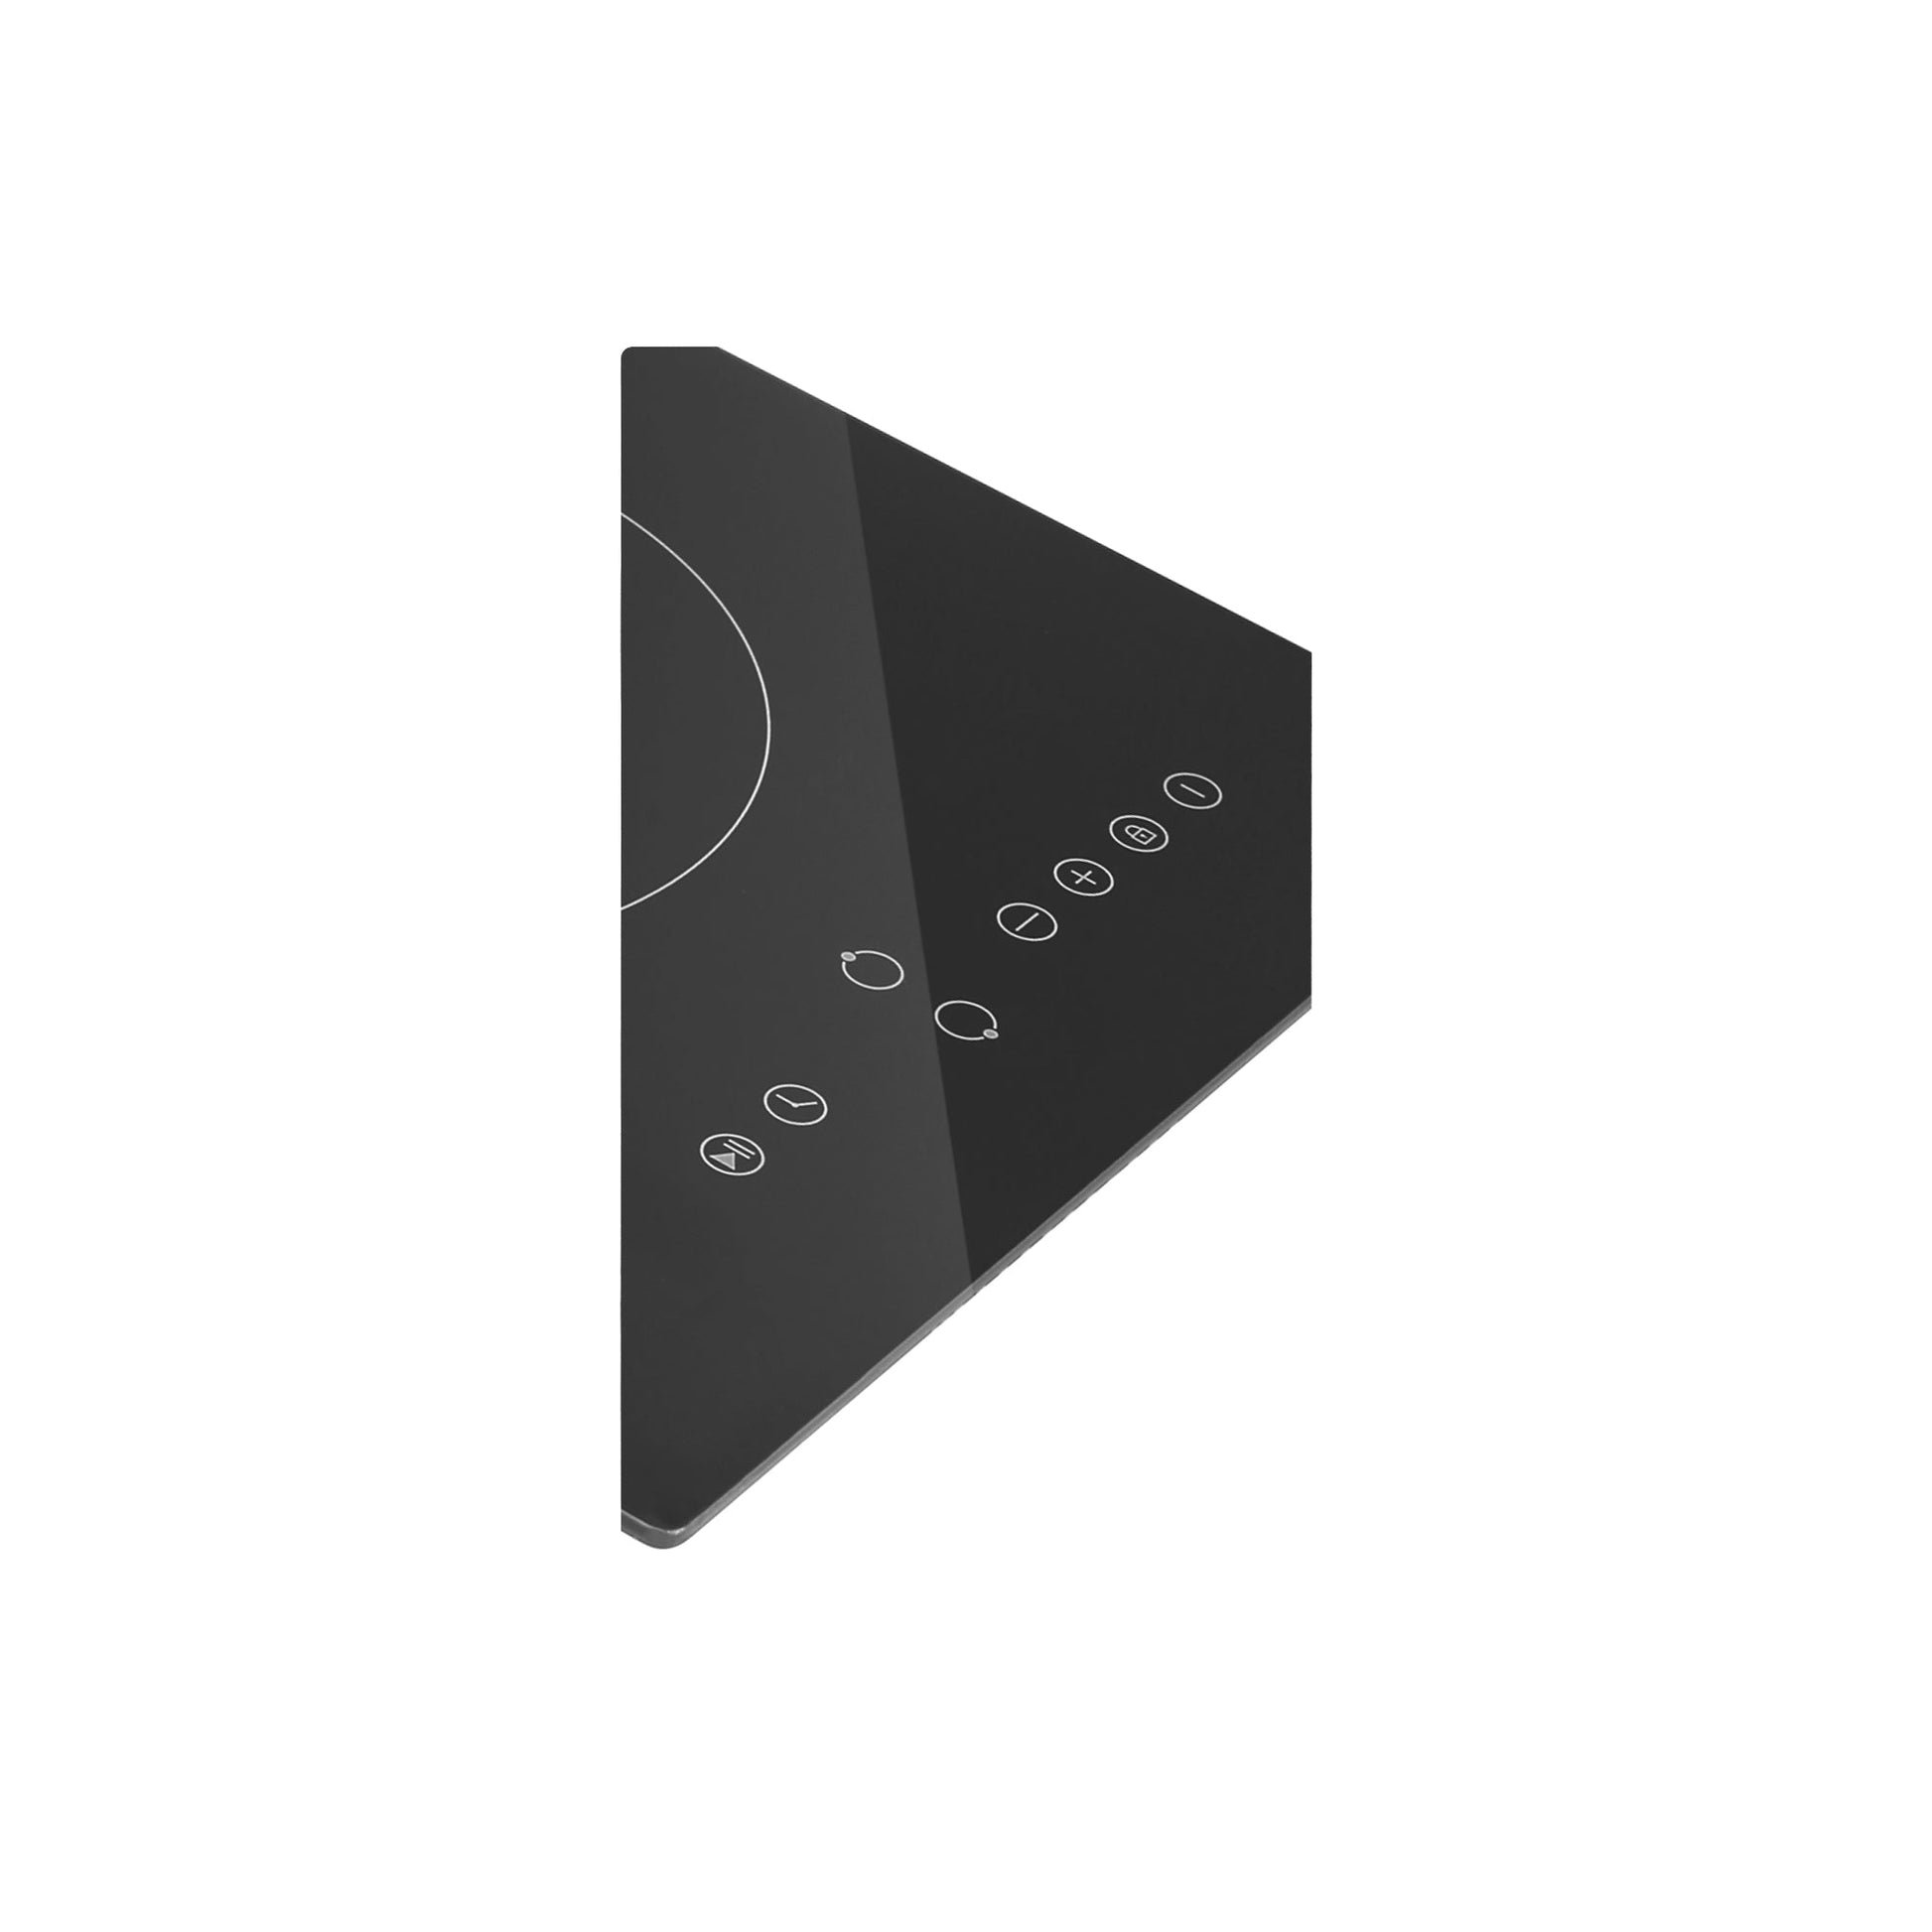 Empava 12 In. Induction Cooktop with 2 burners IDC12B2